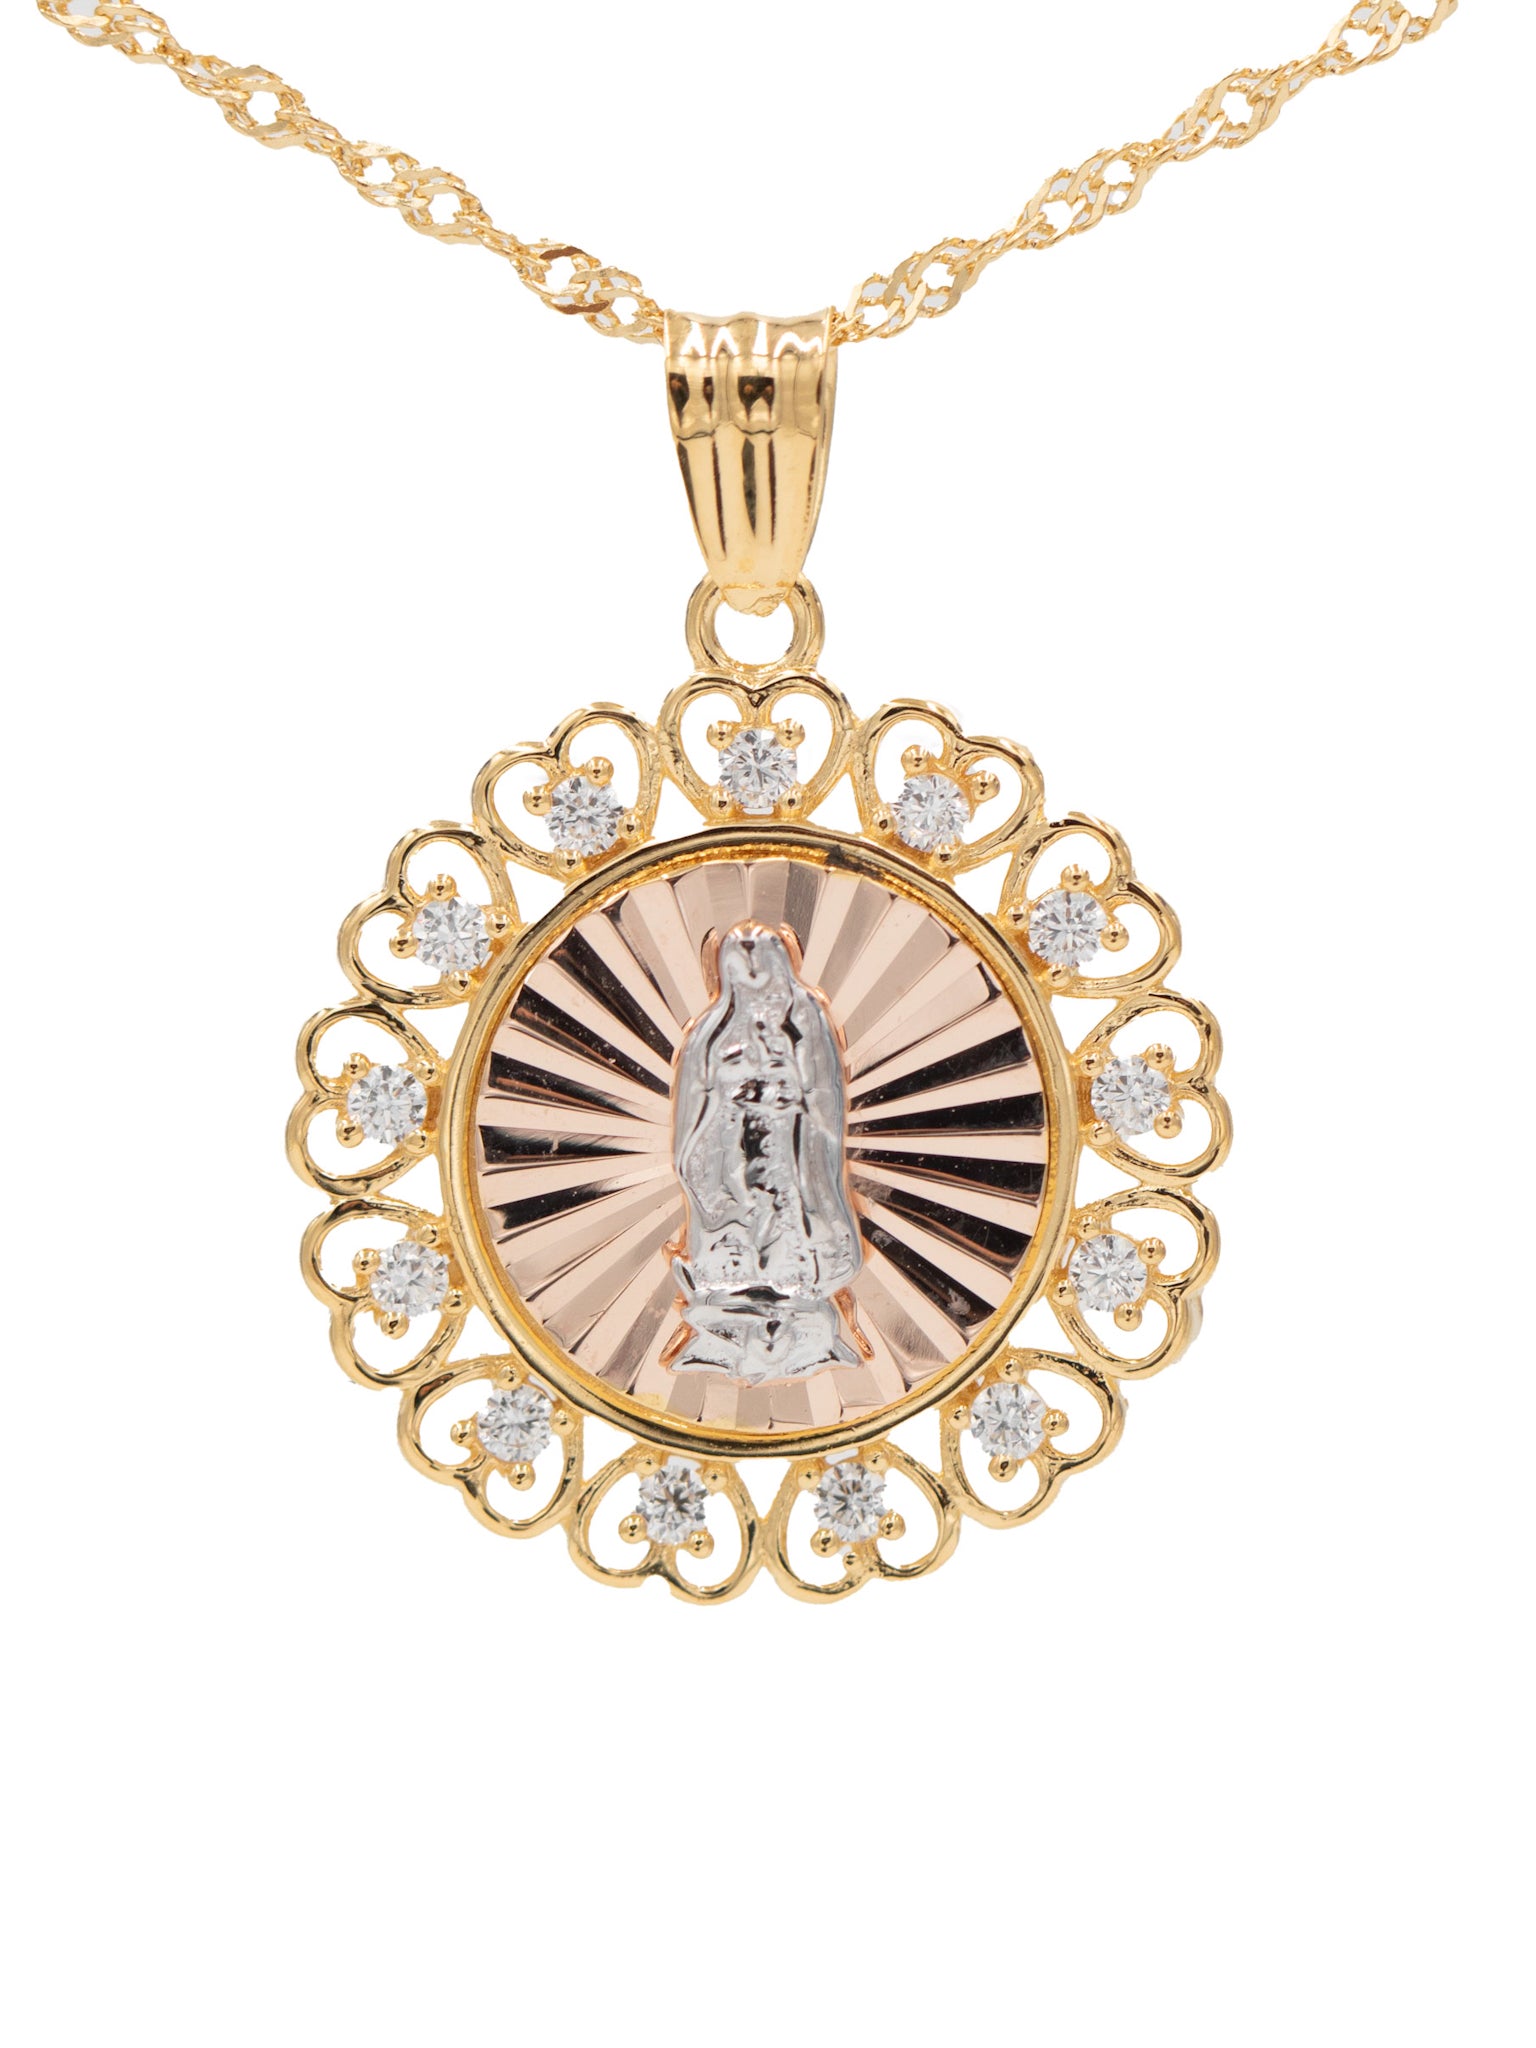 Our Lady of Guadalupe Flower Necklace